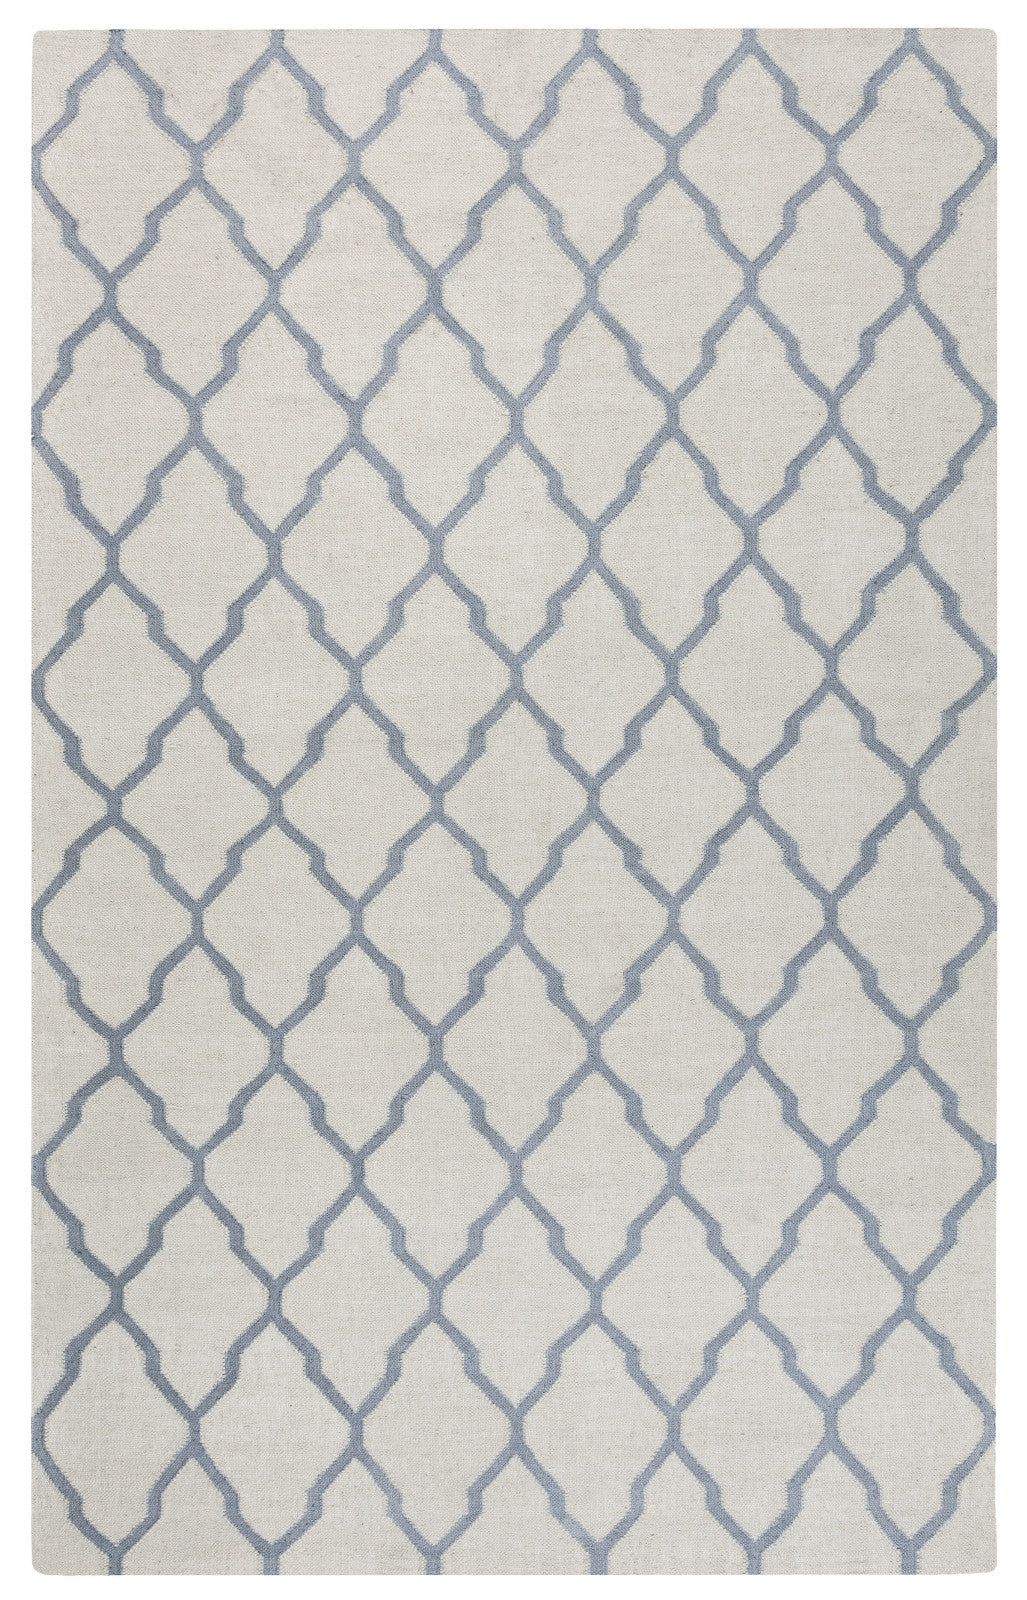 Rizzy Swing SG2963 Off White Area Rug